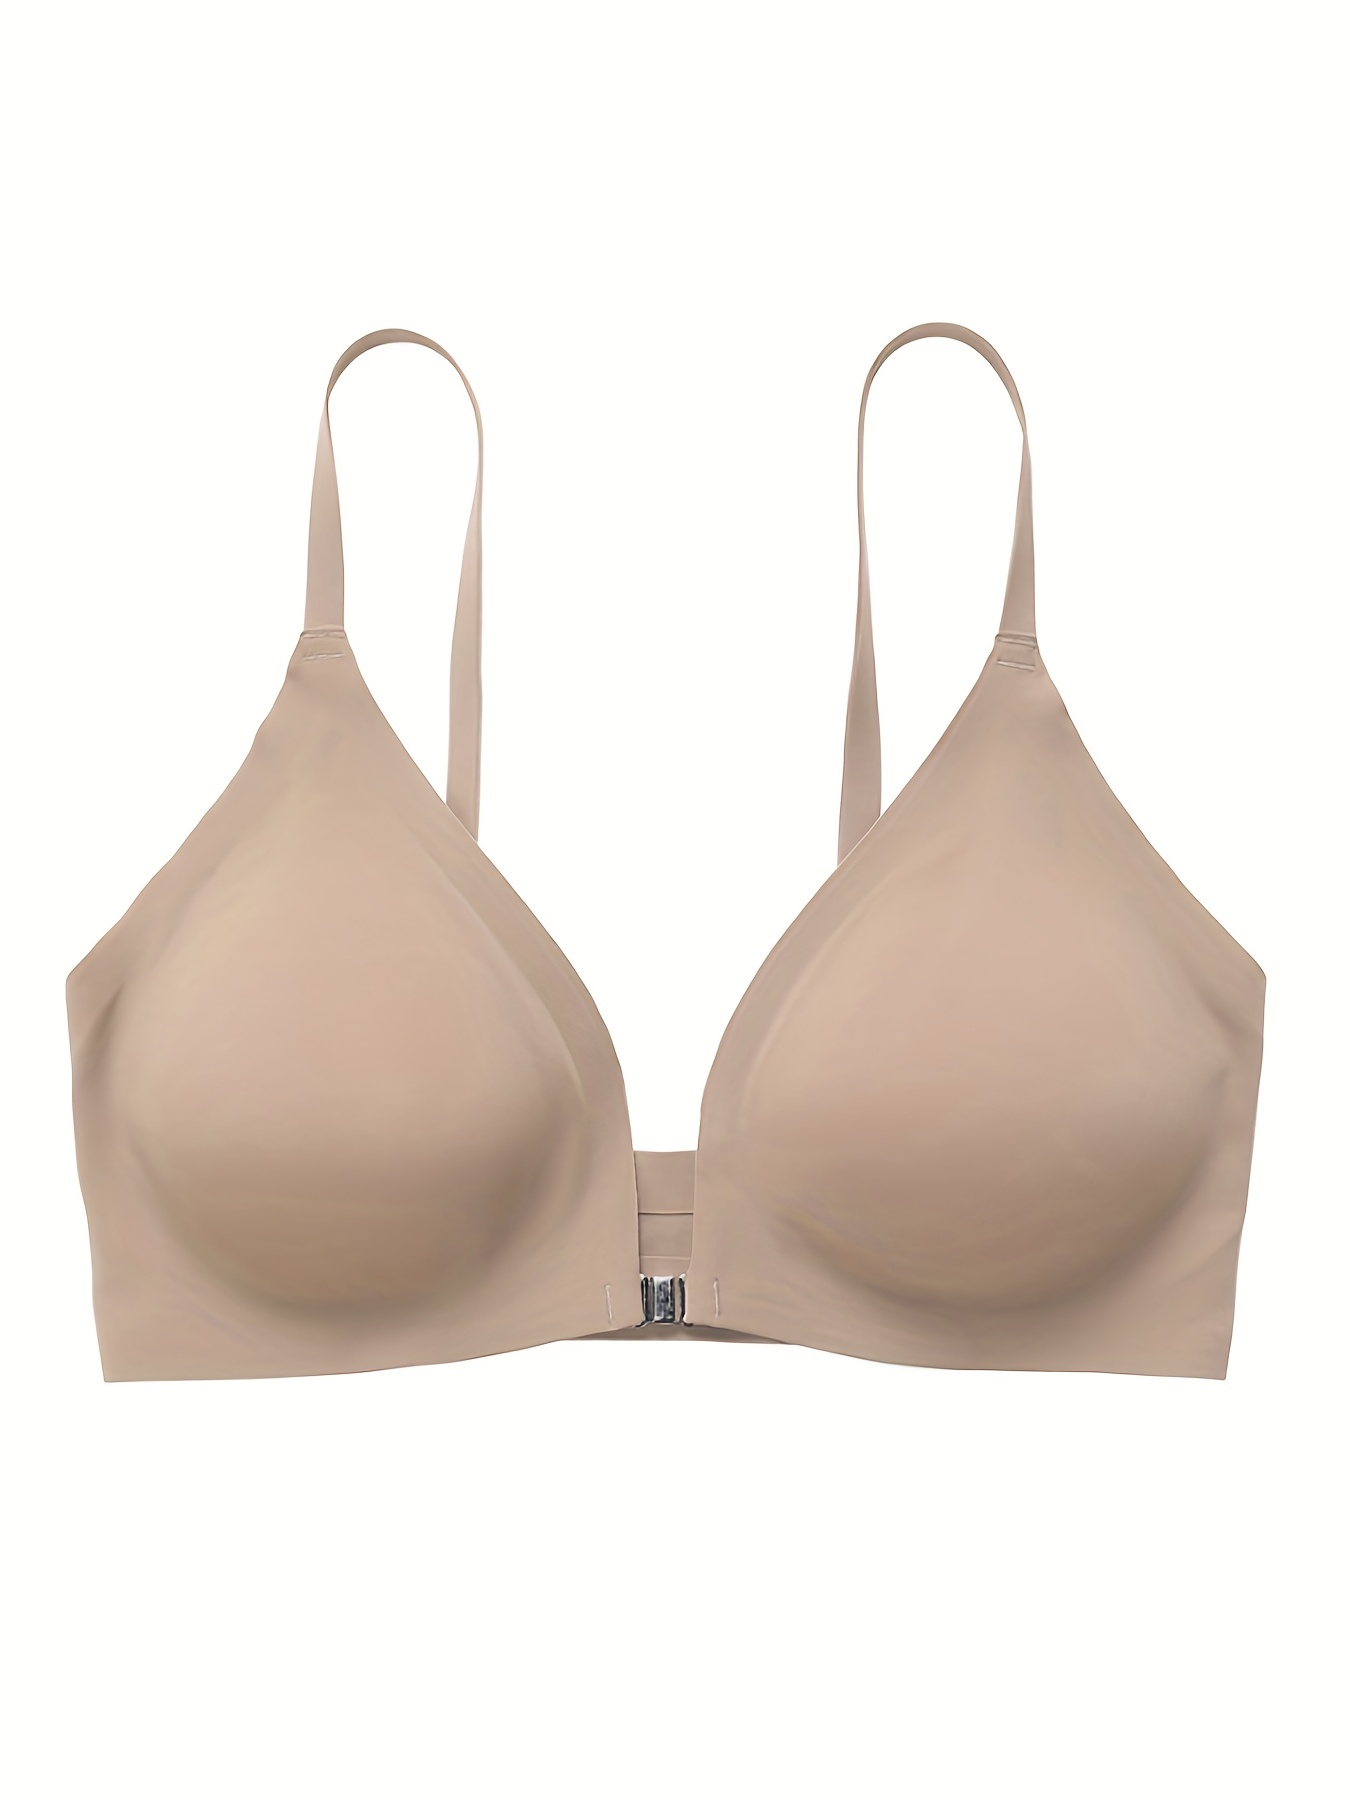  Front Close Bras for Women Push Up Bras for Women No